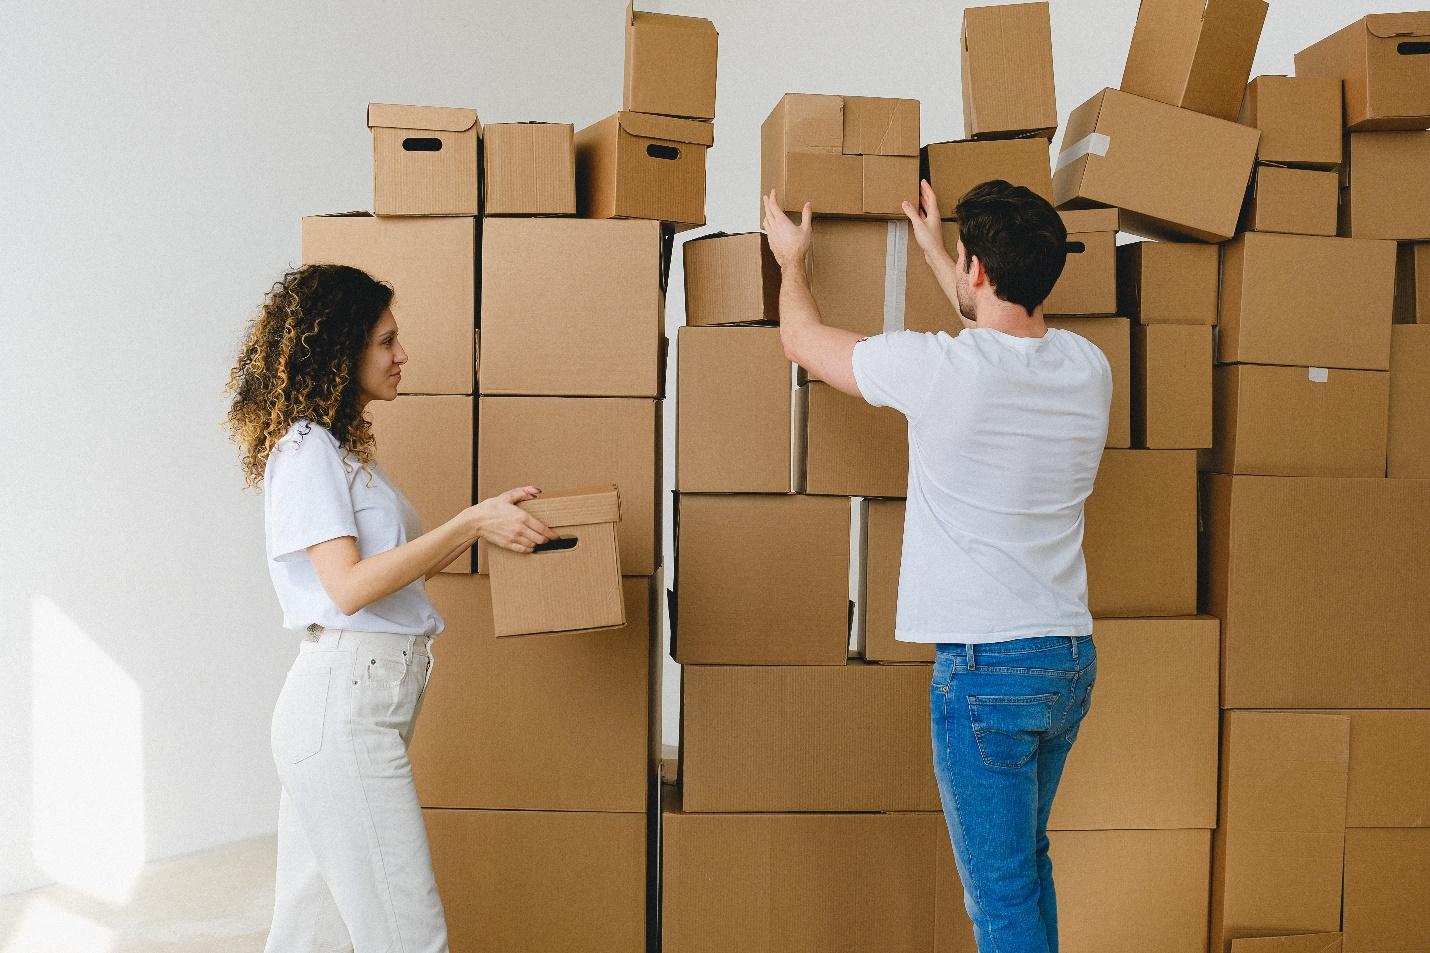 Two people standing next to a pile of boxes  Description automatically generated with low confidence